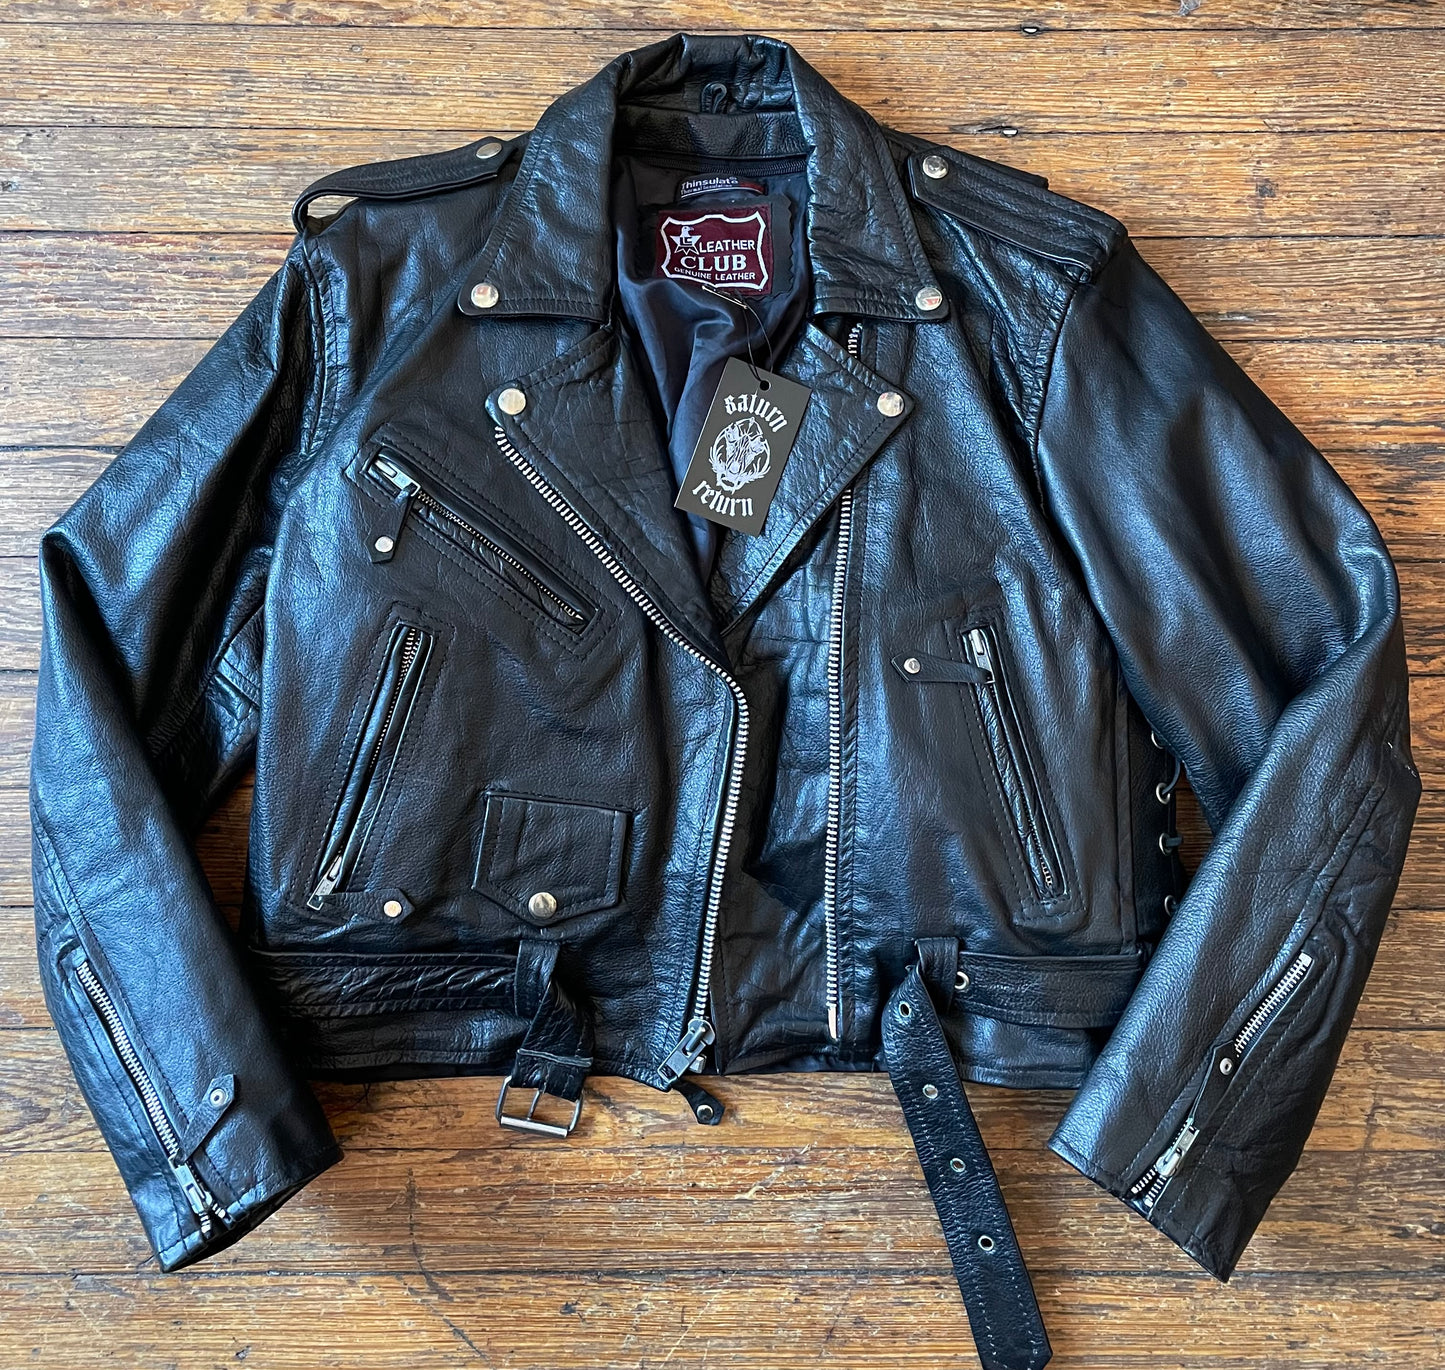 Vintage Leather Club Classic Motorcycle Jacket